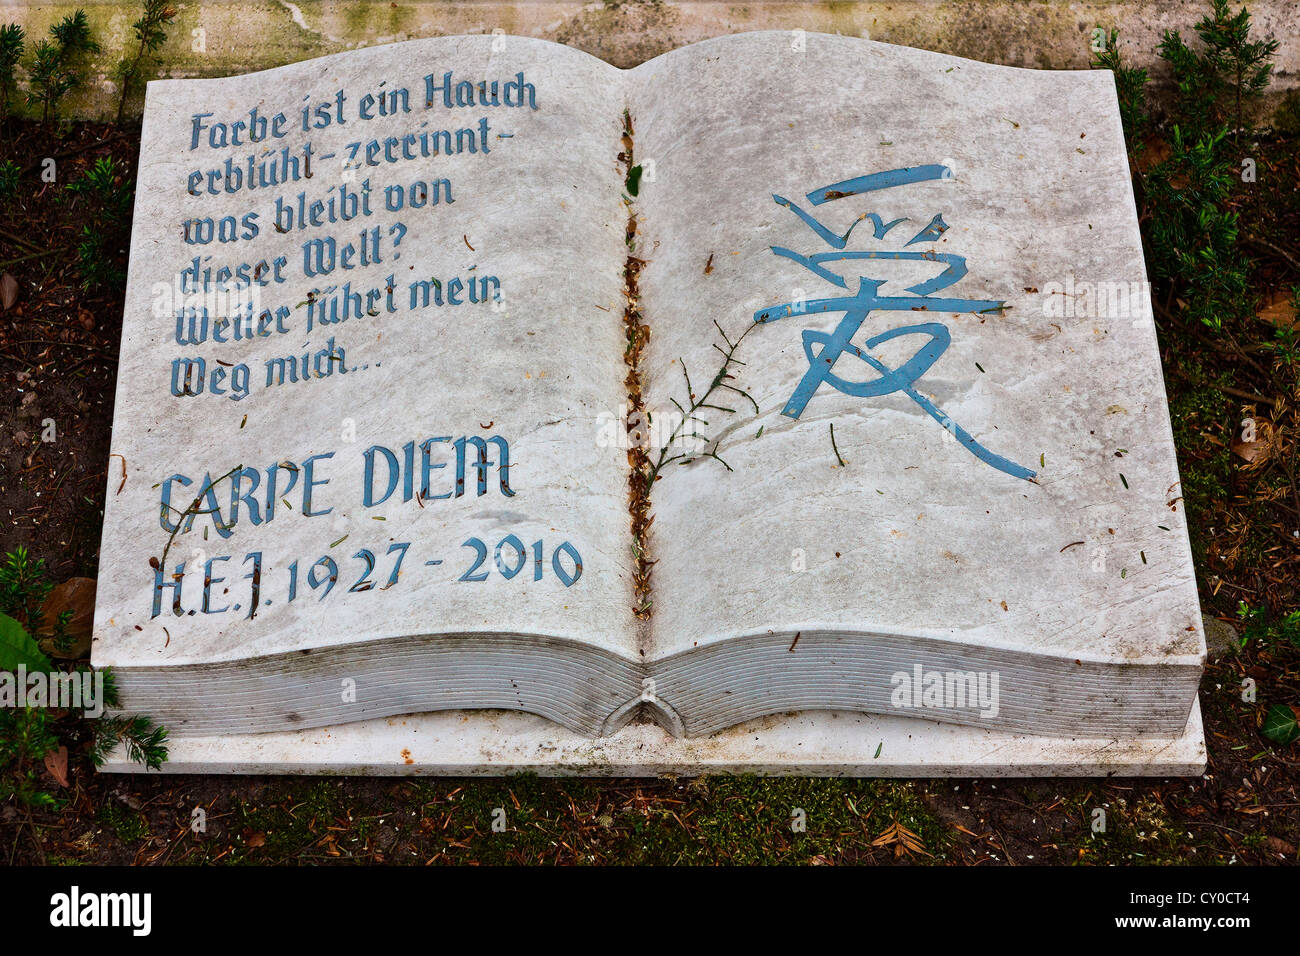 Stone book inscribed with carpe diem at the Historical Cemetery in Weimar, Thuringia Stock Photo